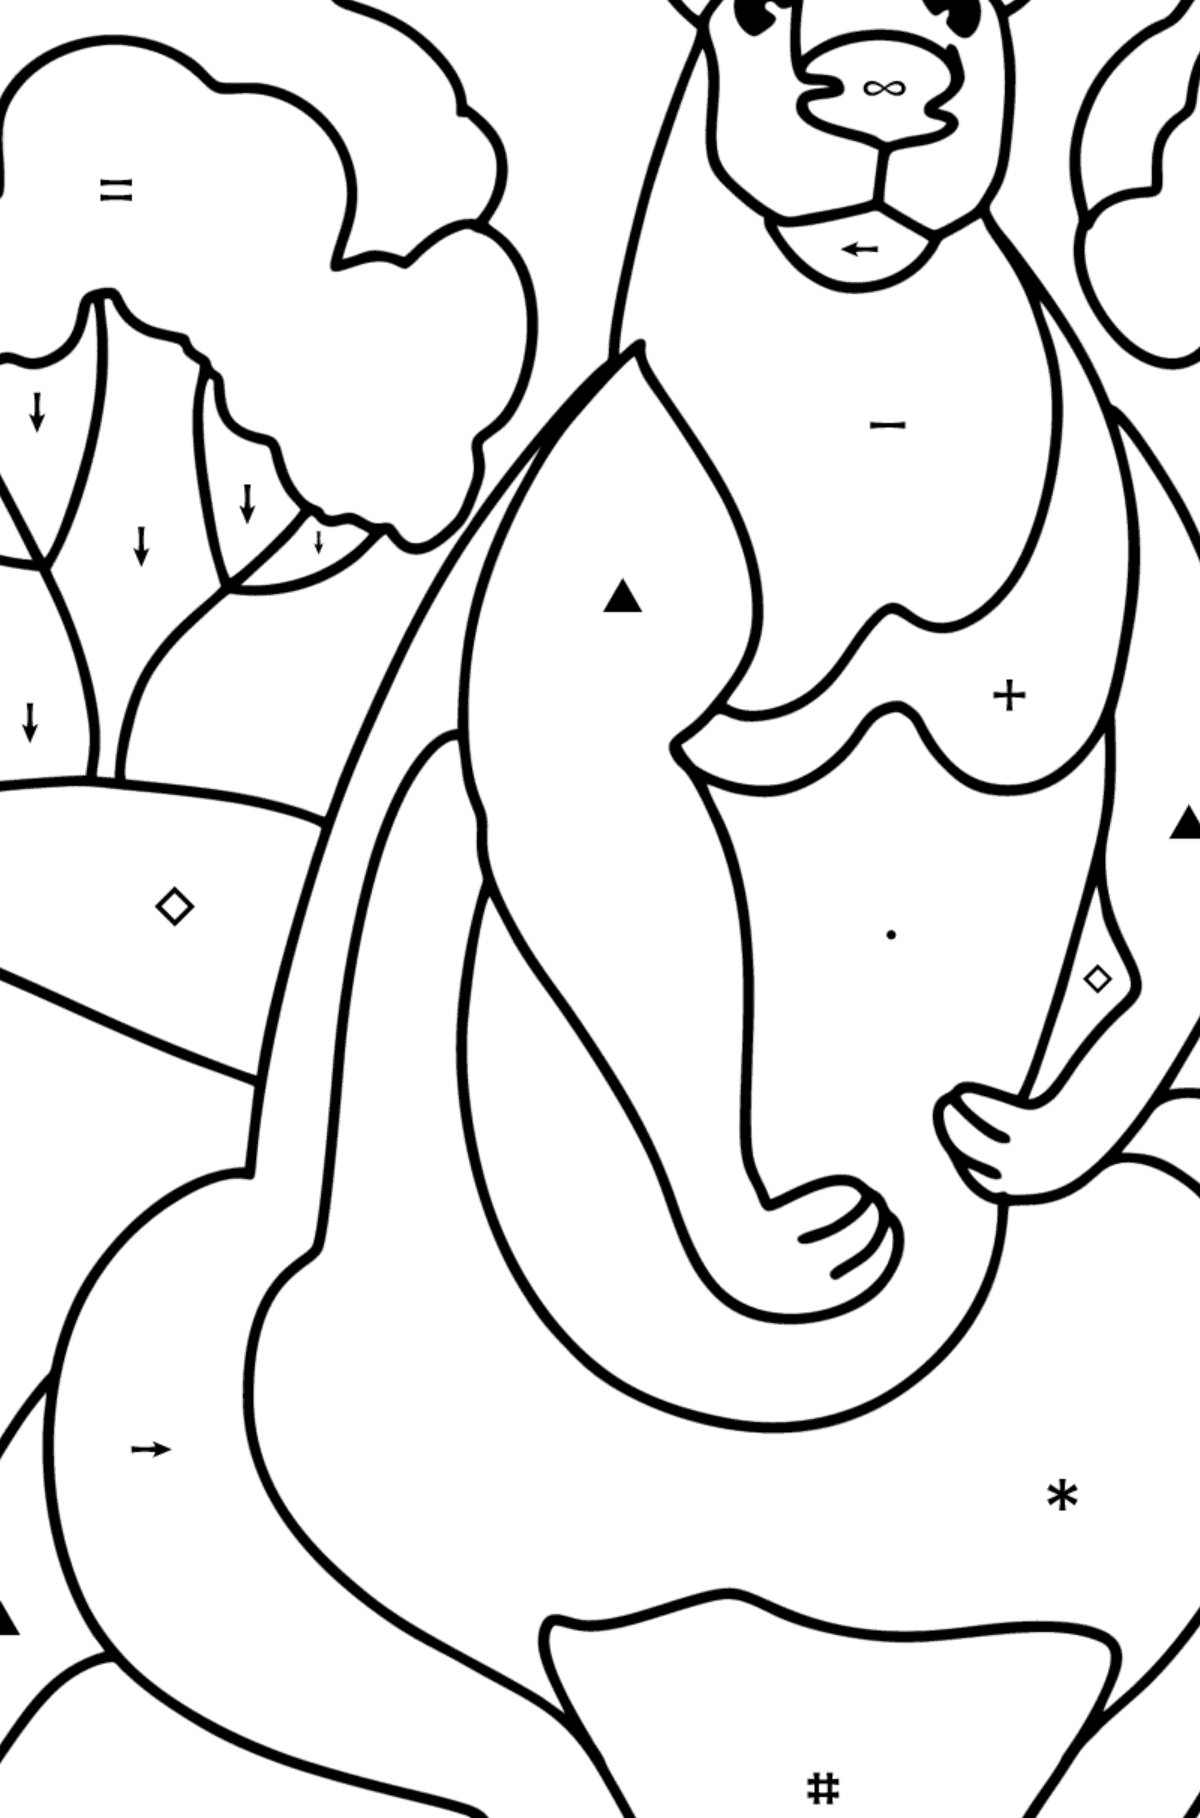 Giant Kangaroo coloring page - Coloring by Symbols for Kids